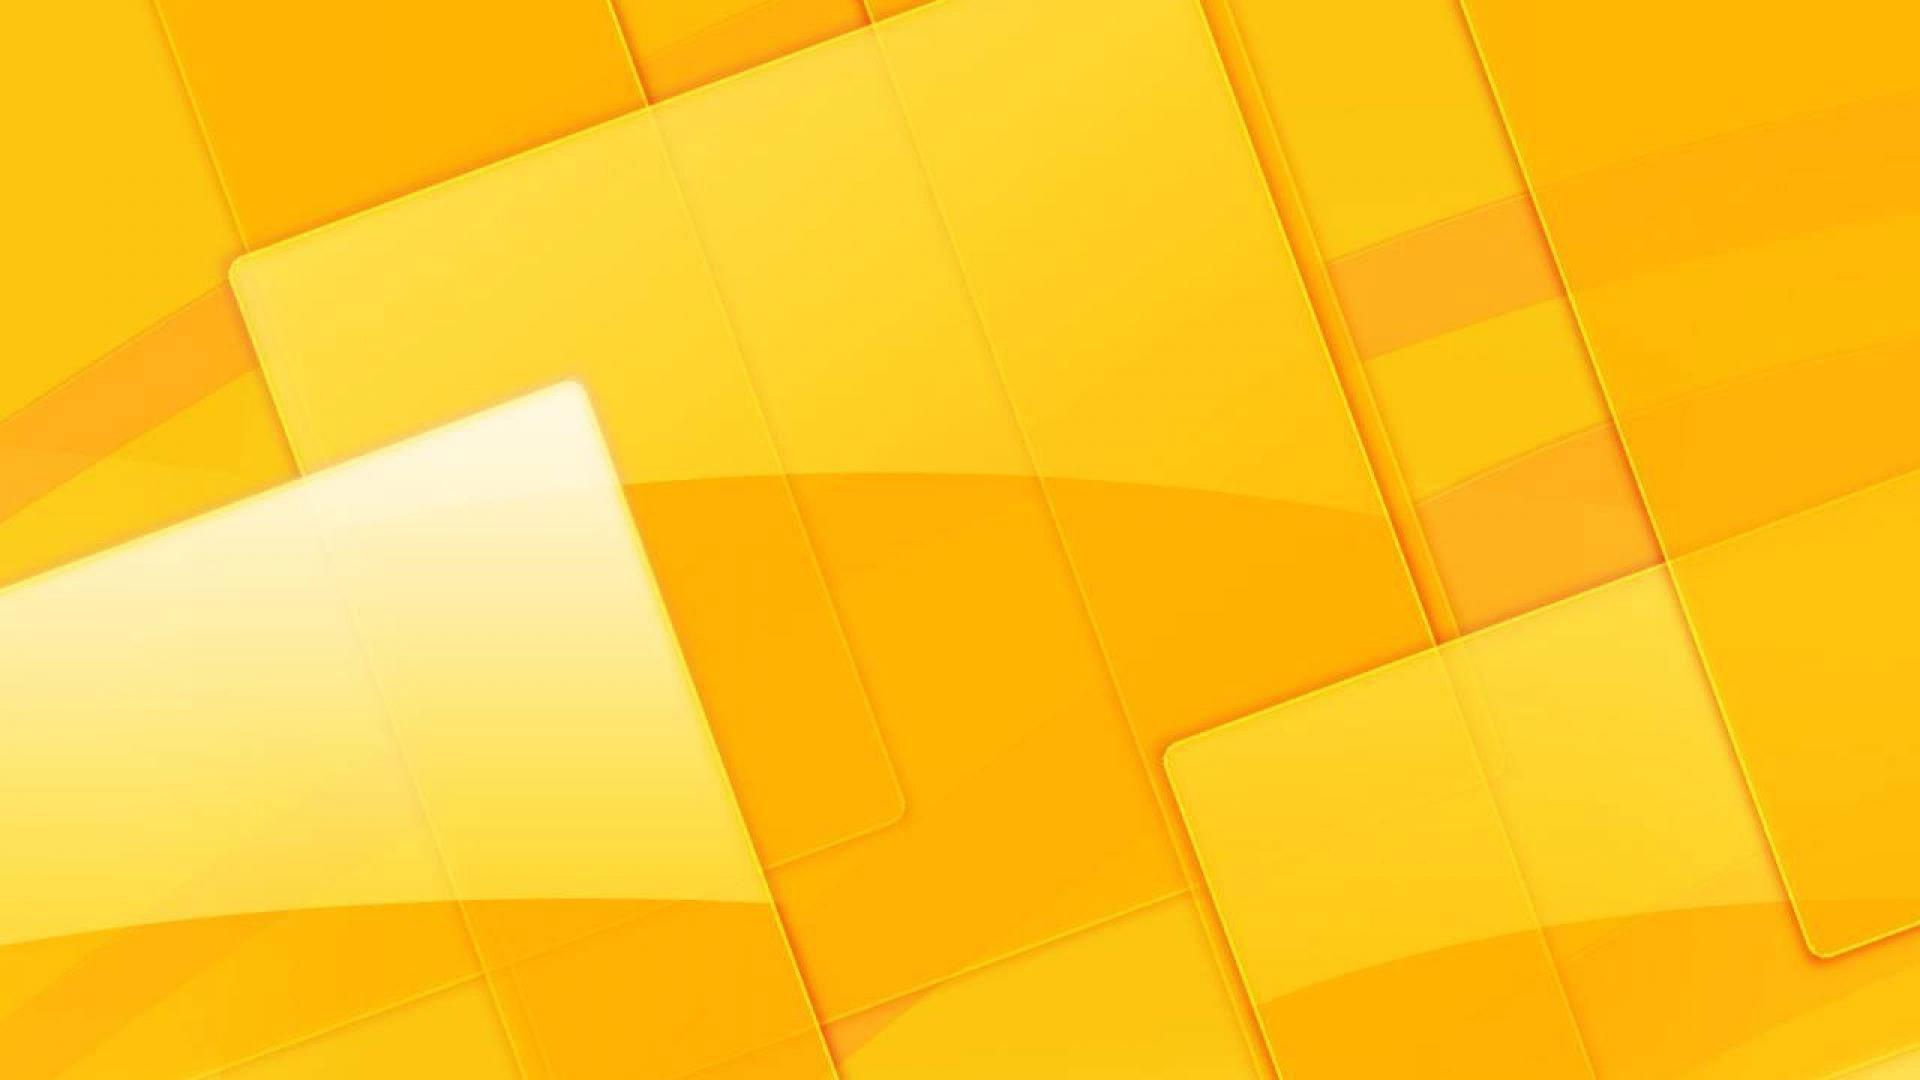 1920 x 1080 · jpeg - Yellow Mustard Wallpaper 12 0f 20 with Abstract Geometric Rectangles ...